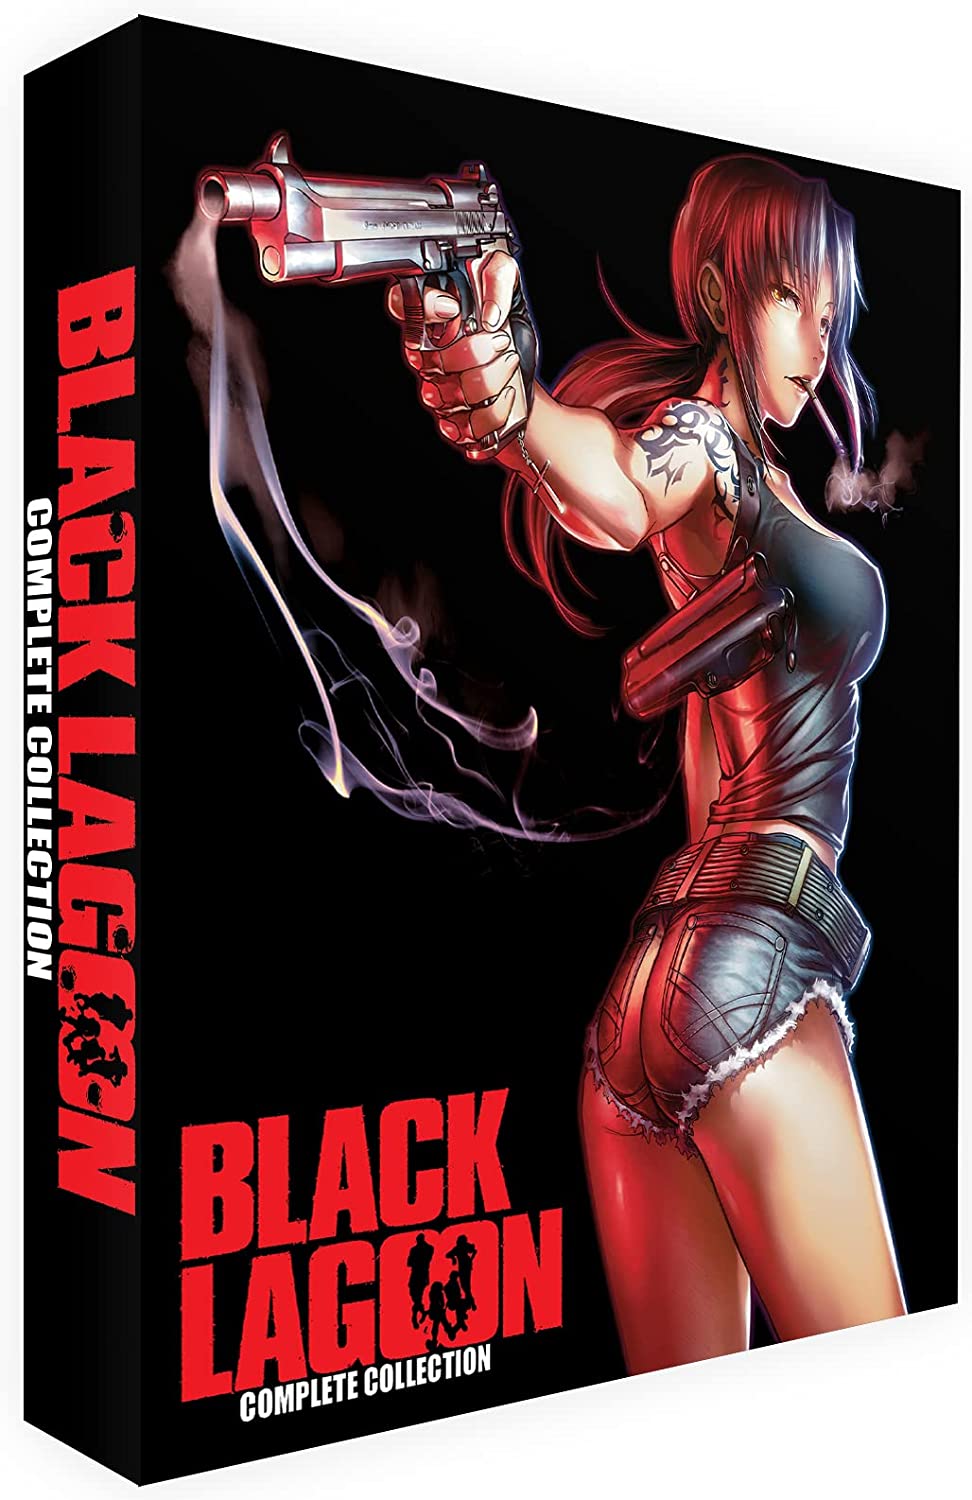 Black Lagoon - Complete Series (Limited Edition) - Action fiction [Blu-ray]